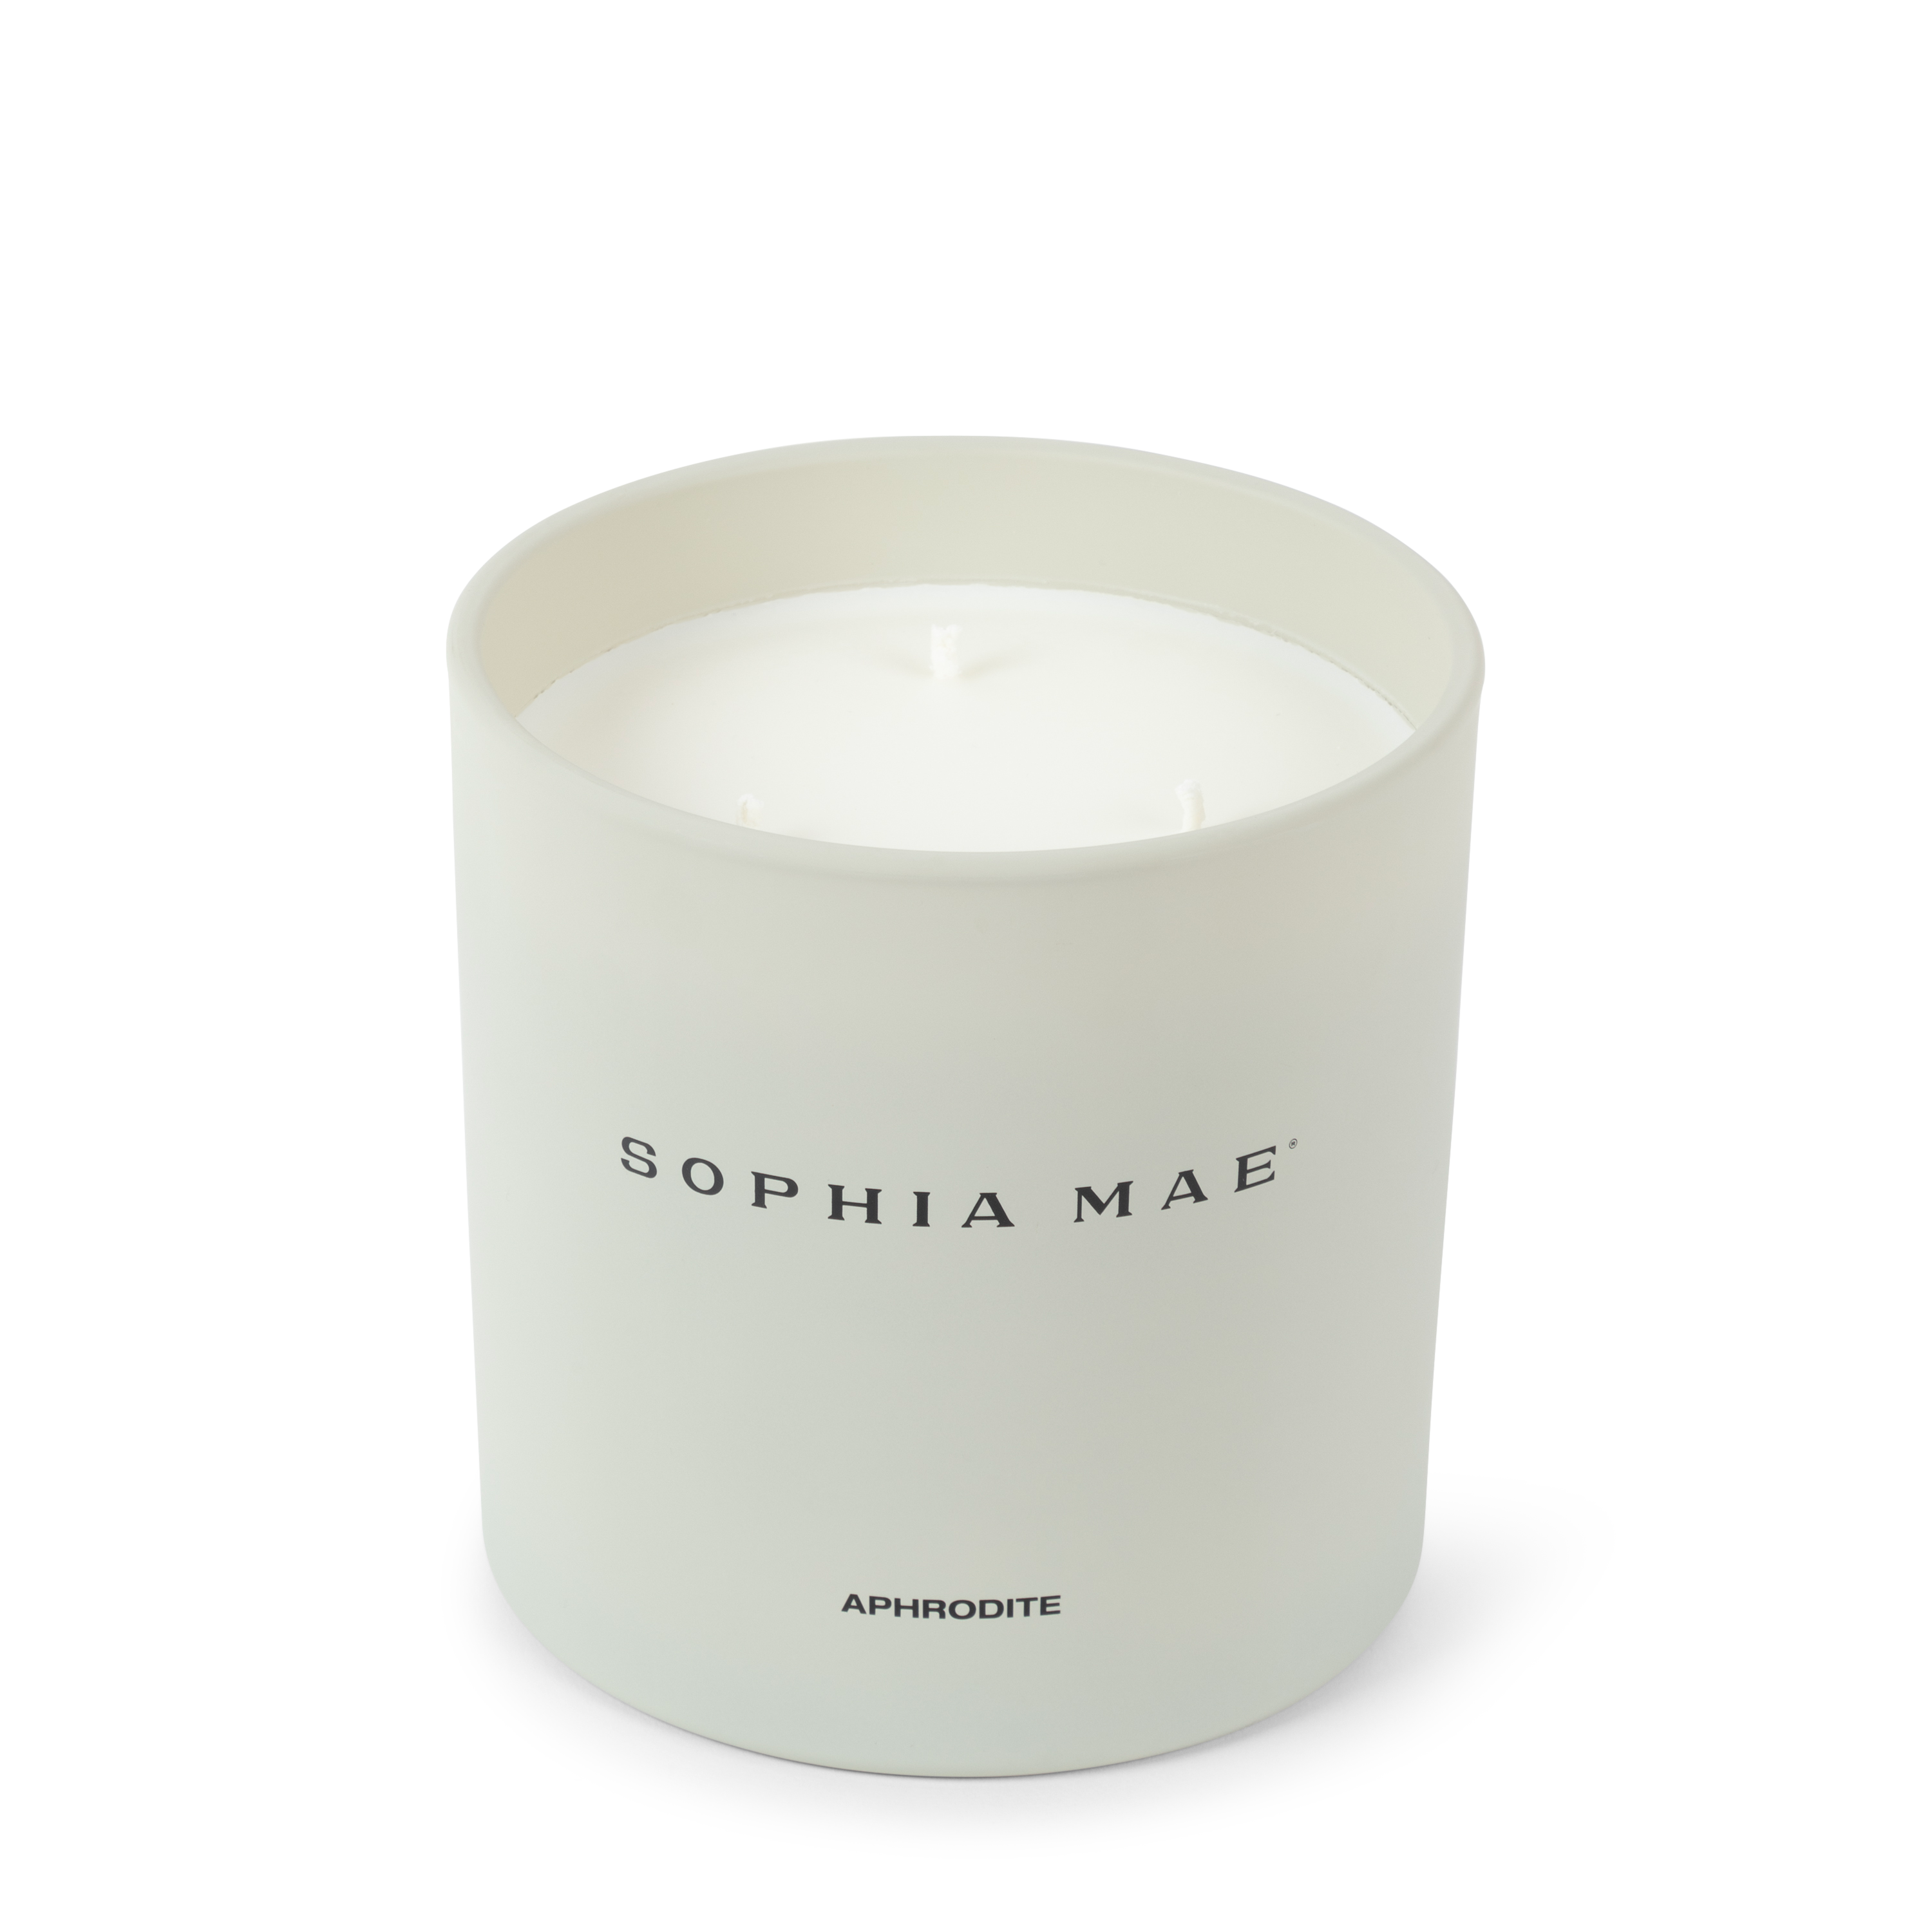 MAXI SCENTED CANDLE APHRODITE | SOPHIA MAE by Monica Geuze